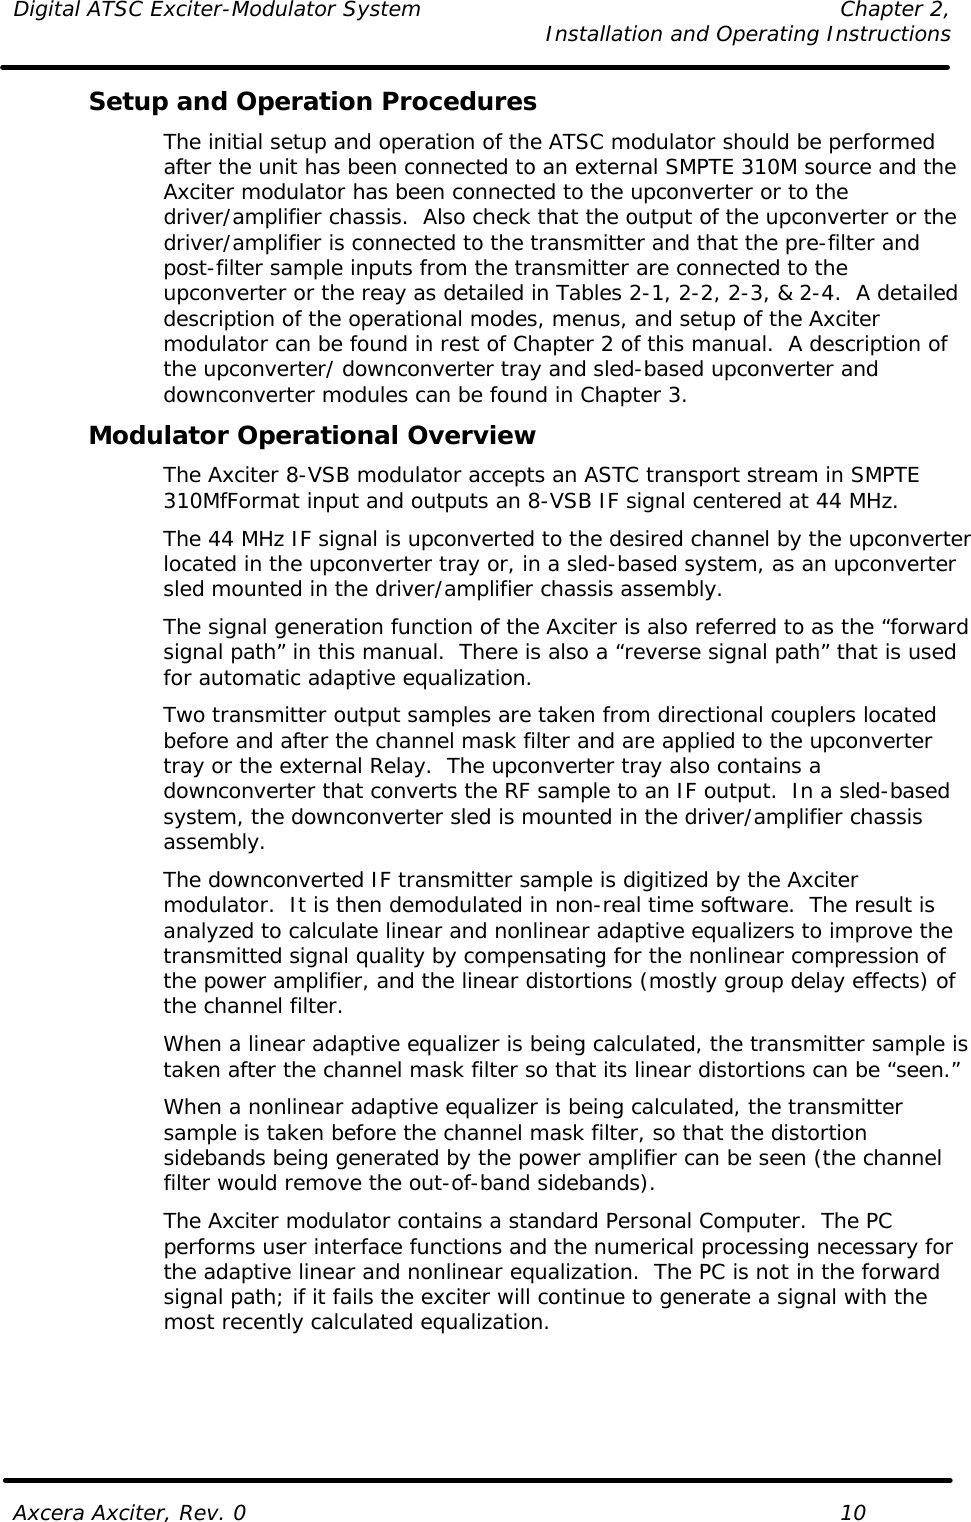 Digital ATSC Exciter-Modulator System Chapter 2,   Installation and Operating Instructions  Axcera Axciter, Rev. 0    10 Setup and Operation Procedures The initial setup and operation of the ATSC modulator should be performed after the unit has been connected to an external SMPTE 310M source and the Axciter modulator has been connected to the upconverter or to the driver/amplifier chassis.  Also check that the output of the upconverter or the driver/amplifier is connected to the transmitter and that the pre-filter and post-filter sample inputs from the transmitter are connected to the upconverter or the reay as detailed in Tables 2-1, 2-2, 2-3, &amp; 2-4.  A detailed description of the operational modes, menus, and setup of the Axciter modulator can be found in rest of Chapter 2 of this manual.  A description of the upconverter/ downconverter tray and sled-based upconverter and downconverter modules can be found in Chapter 3. Modulator Operational Overview The Axciter 8-VSB modulator accepts an ASTC transport stream in SMPTE 310MfFormat input and outputs an 8-VSB IF signal centered at 44 MHz.  The 44 MHz IF signal is upconverted to the desired channel by the upconverter located in the upconverter tray or, in a sled-based system, as an upconverter sled mounted in the driver/amplifier chassis assembly. The signal generation function of the Axciter is also referred to as the “forward signal path” in this manual.  There is also a “reverse signal path” that is used for automatic adaptive equalization. Two transmitter output samples are taken from directional couplers located before and after the channel mask filter and are applied to the upconverter tray or the external Relay.  The upconverter tray also contains a downconverter that converts the RF sample to an IF output.  In a sled-based system, the downconverter sled is mounted in the driver/amplifier chassis assembly. The downconverted IF transmitter sample is digitized by the Axciter modulator.  It is then demodulated in non-real time software.  The result is analyzed to calculate linear and nonlinear adaptive equalizers to improve the transmitted signal quality by compensating for the nonlinear compression of the power amplifier, and the linear distortions (mostly group delay effects) of the channel filter. When a linear adaptive equalizer is being calculated, the transmitter sample is taken after the channel mask filter so that its linear distortions can be “seen.” When a nonlinear adaptive equalizer is being calculated, the transmitter sample is taken before the channel mask filter, so that the distortion sidebands being generated by the power amplifier can be seen (the channel filter would remove the out-of-band sidebands). The Axciter modulator contains a standard Personal Computer.  The PC performs user interface functions and the numerical processing necessary for the adaptive linear and nonlinear equalization.  The PC is not in the forward signal path; if it fails the exciter will continue to generate a signal with the most recently calculated equalization. 